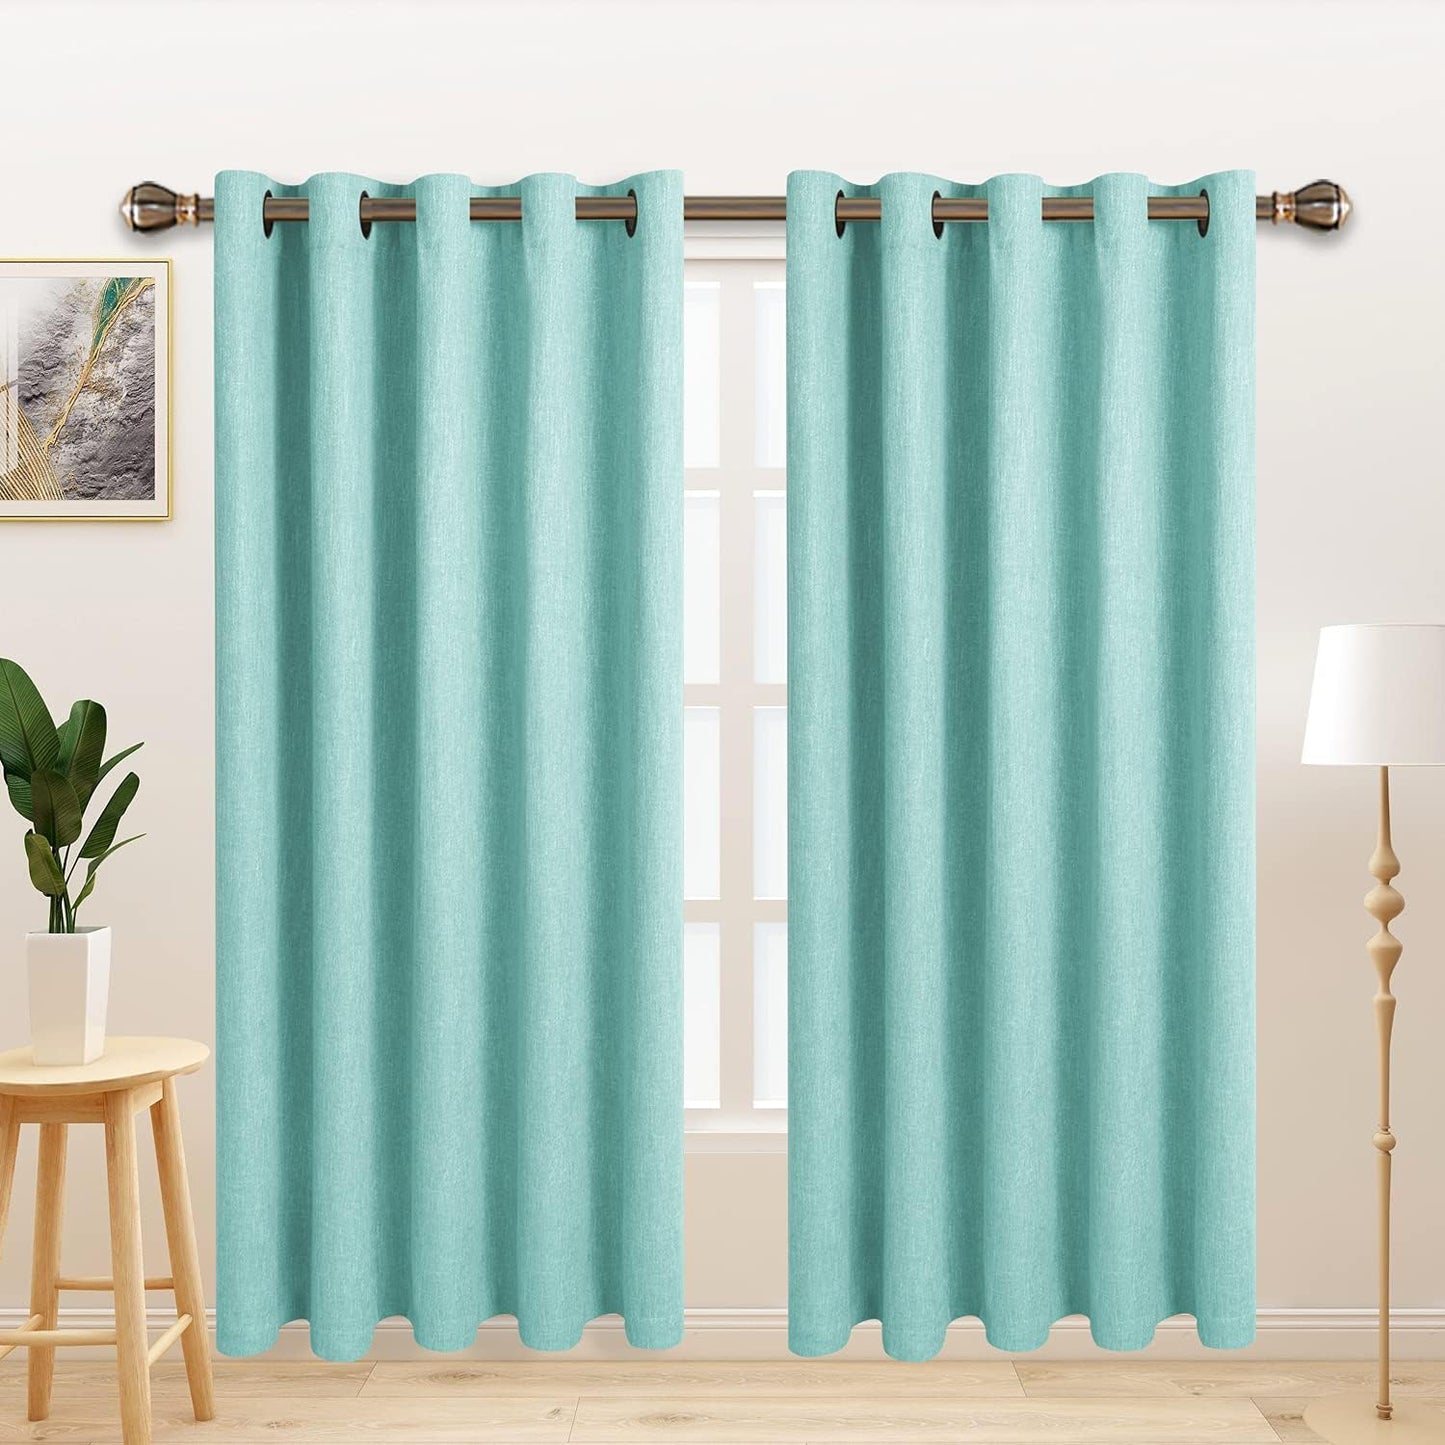 LORDTEX Linen Look Textured Blackout Curtains with Thermal Insulated Liner - Heavy Thick Grommet Window Drapes for Bedroom, 50 X 84 Inches, Ivory, Set of 2 Panels  LORDTEX Seafoam 70 X 84 Inches 